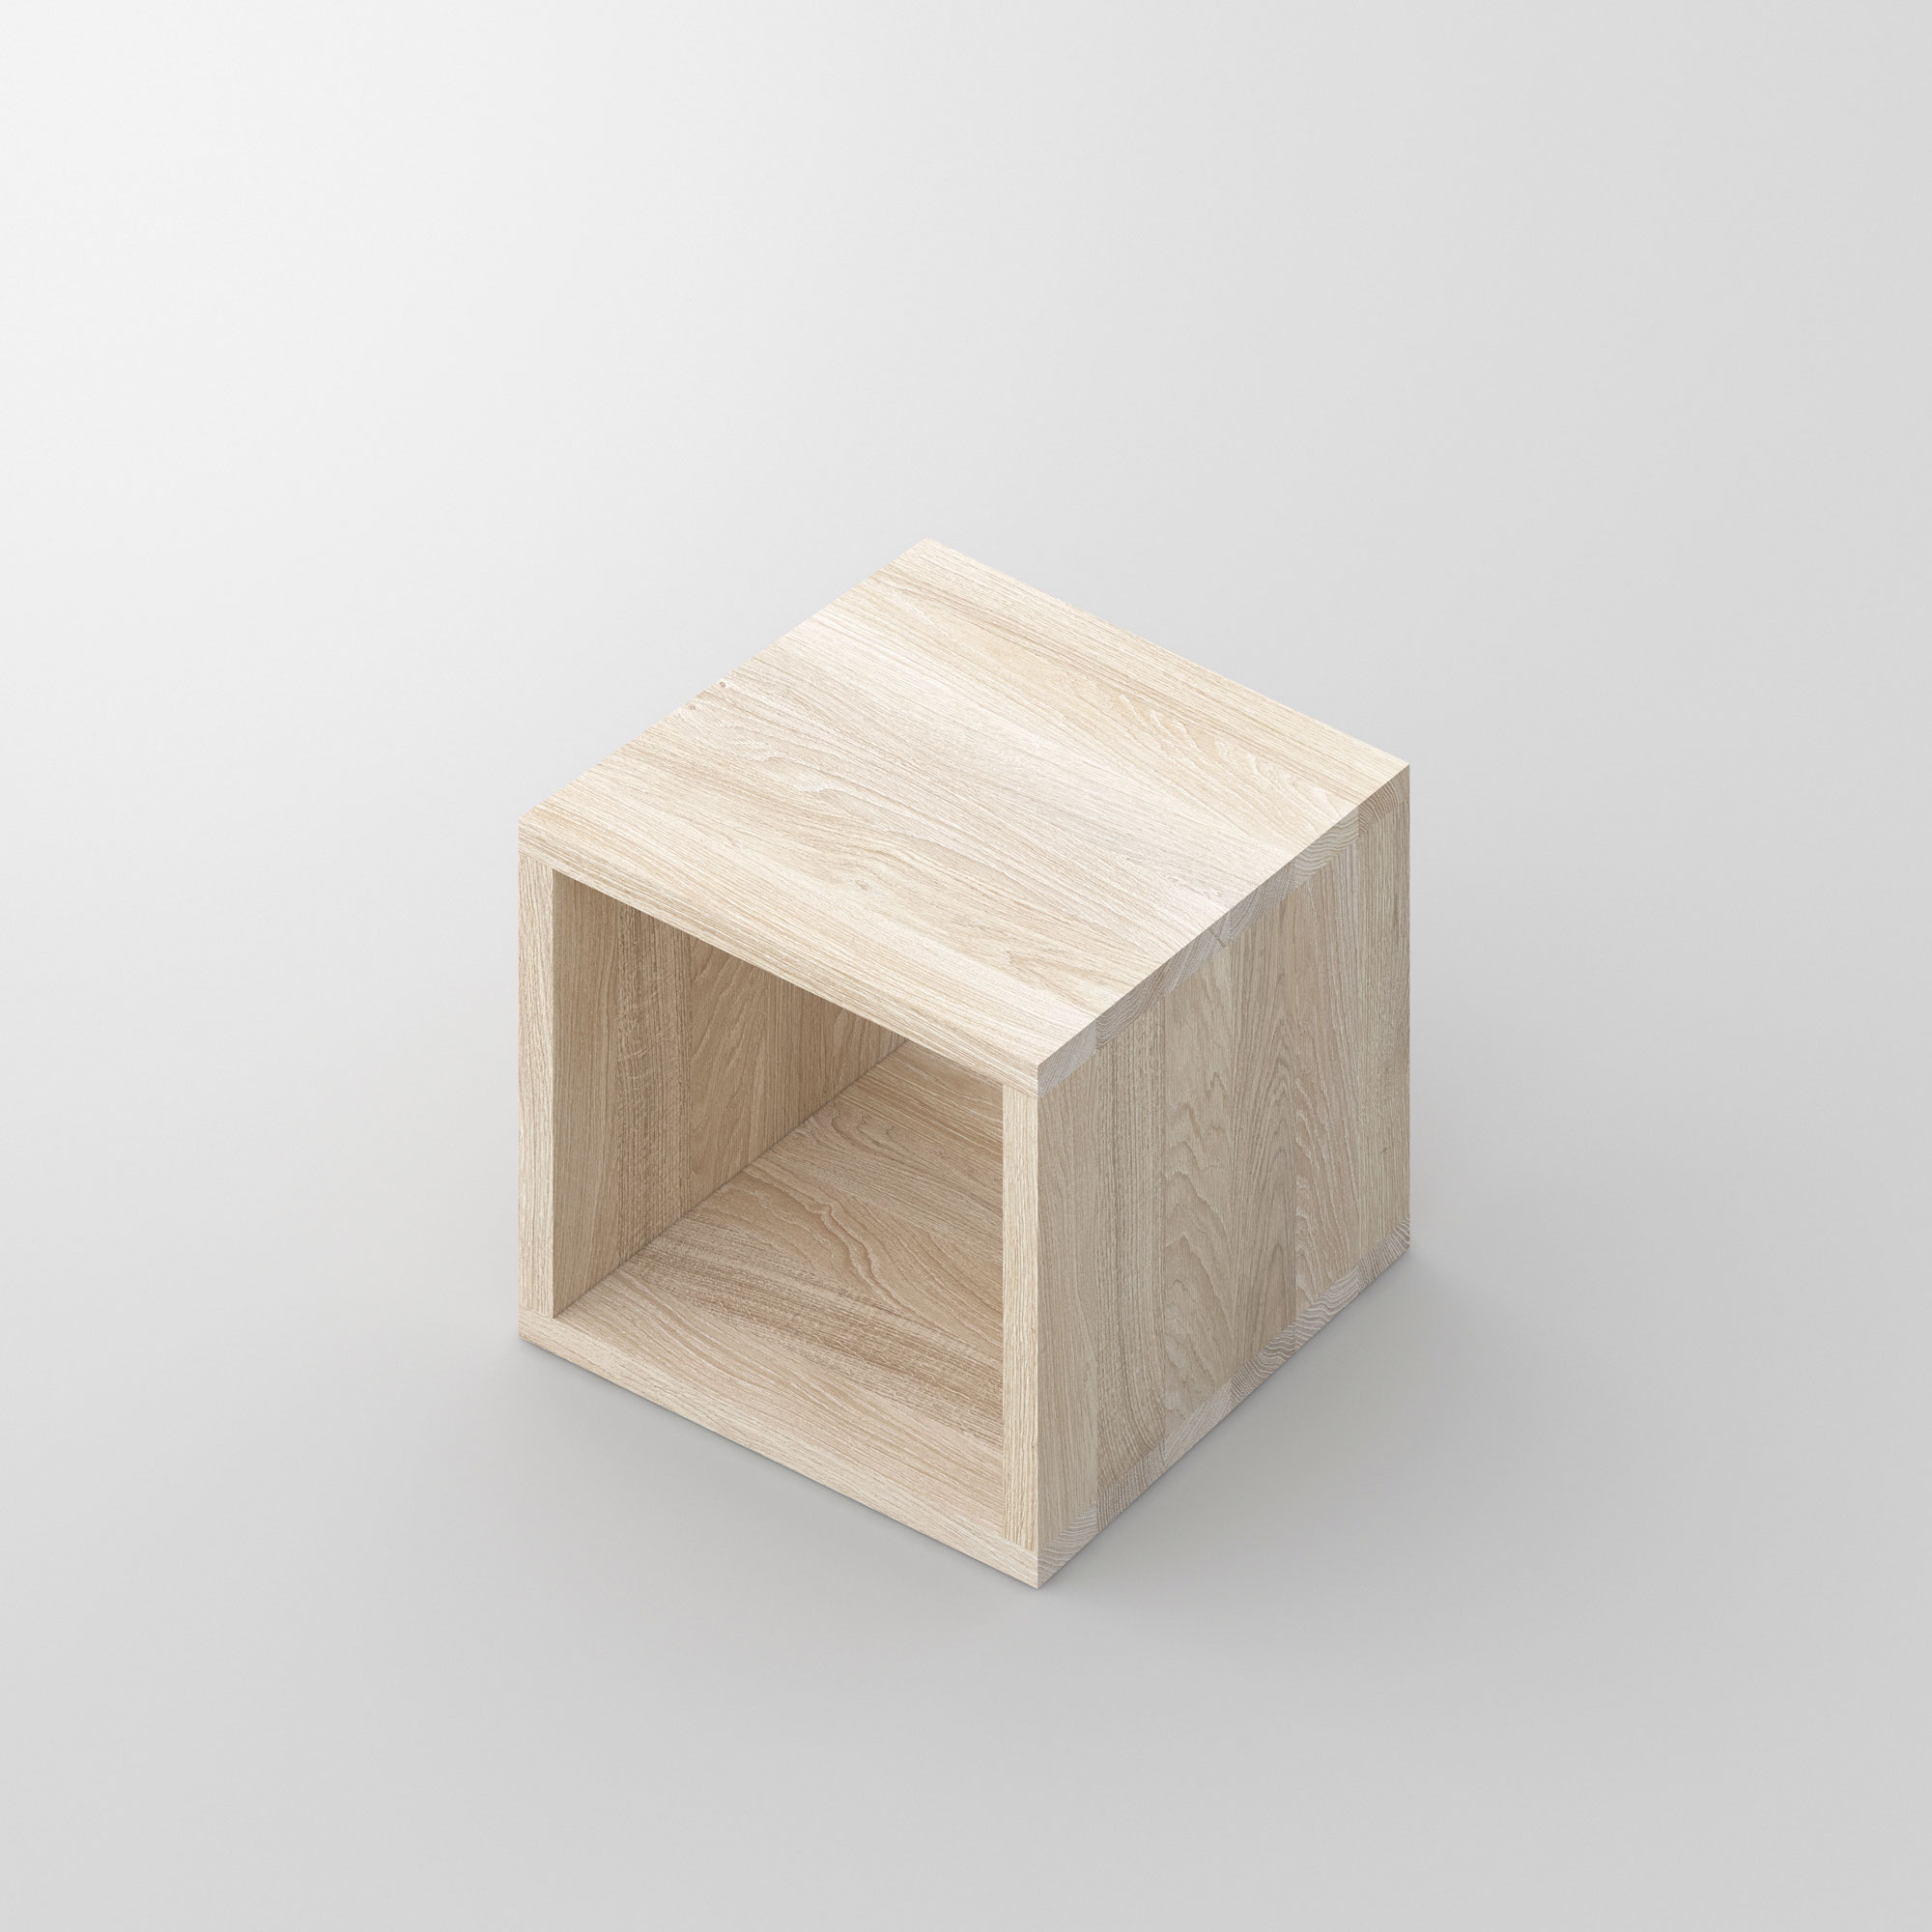 Solid Wood Night Table MENA B cam3 custom made in solid wood by vitamin design